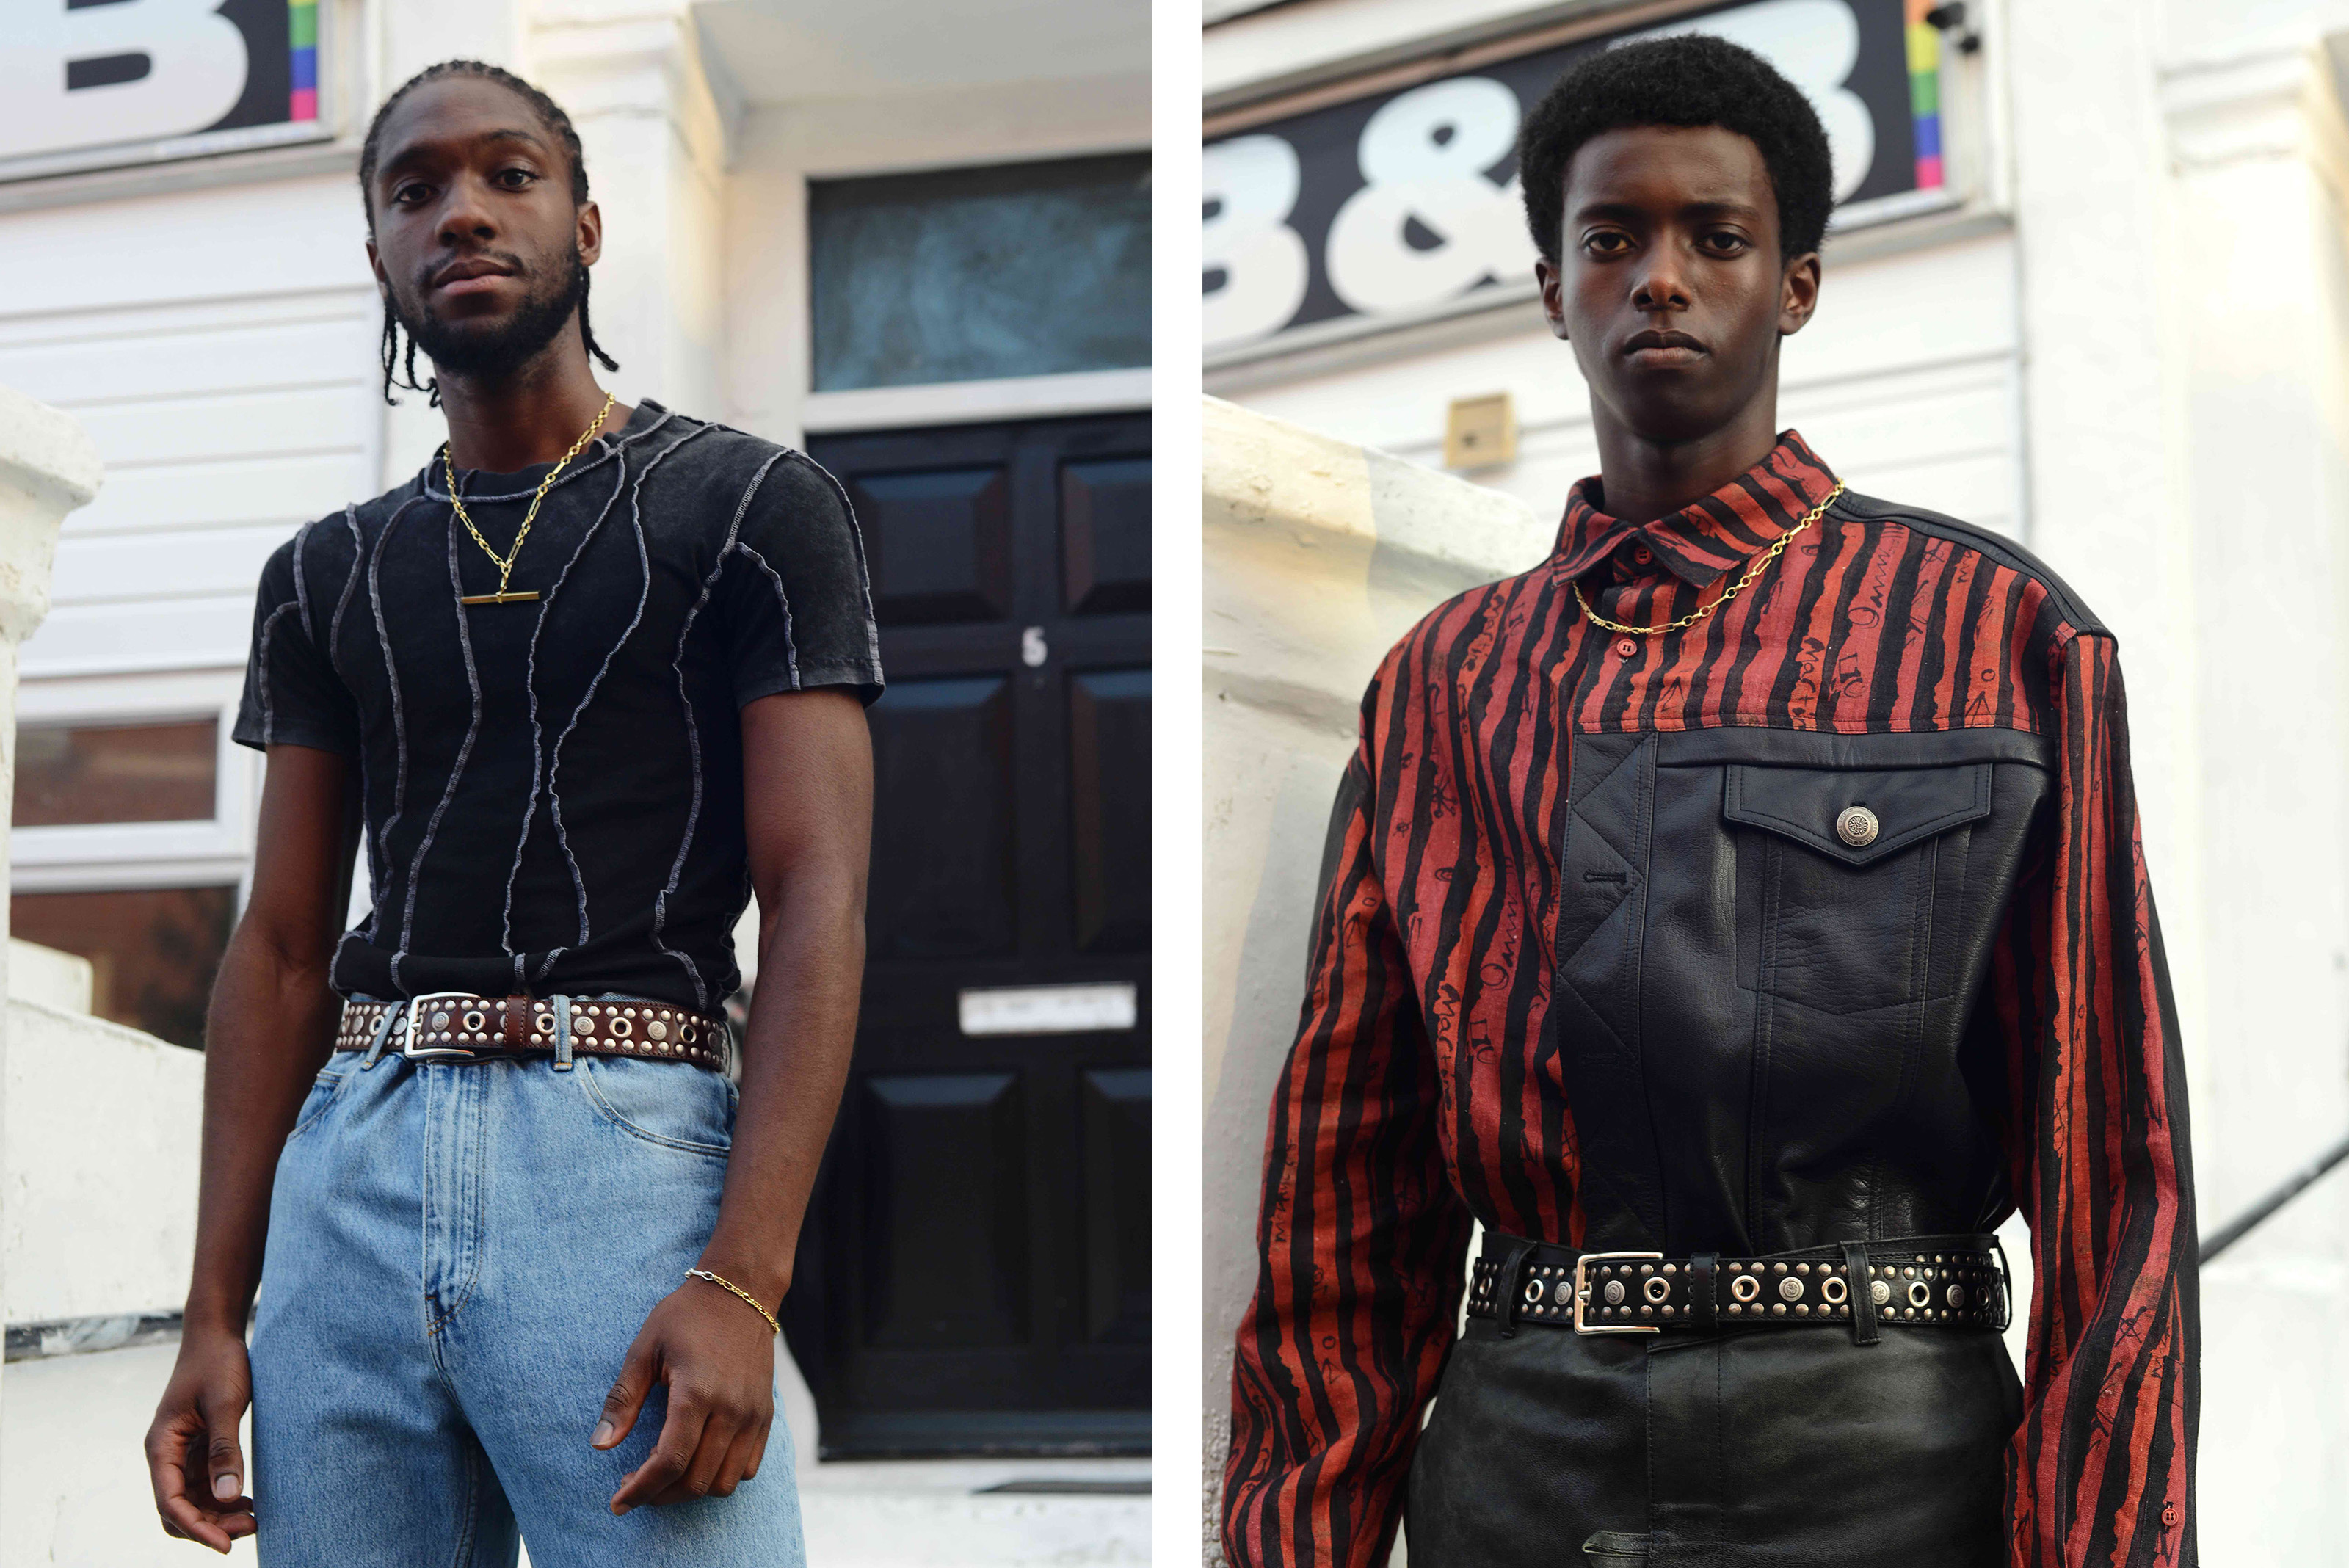 Martine Rose Balenciaga Napapijri London Fashion Week Mens Interview Behind The Scenes Backstage Spring/Summer 2019 2018 Fall/Winter Collection Closer Look Details In Depth